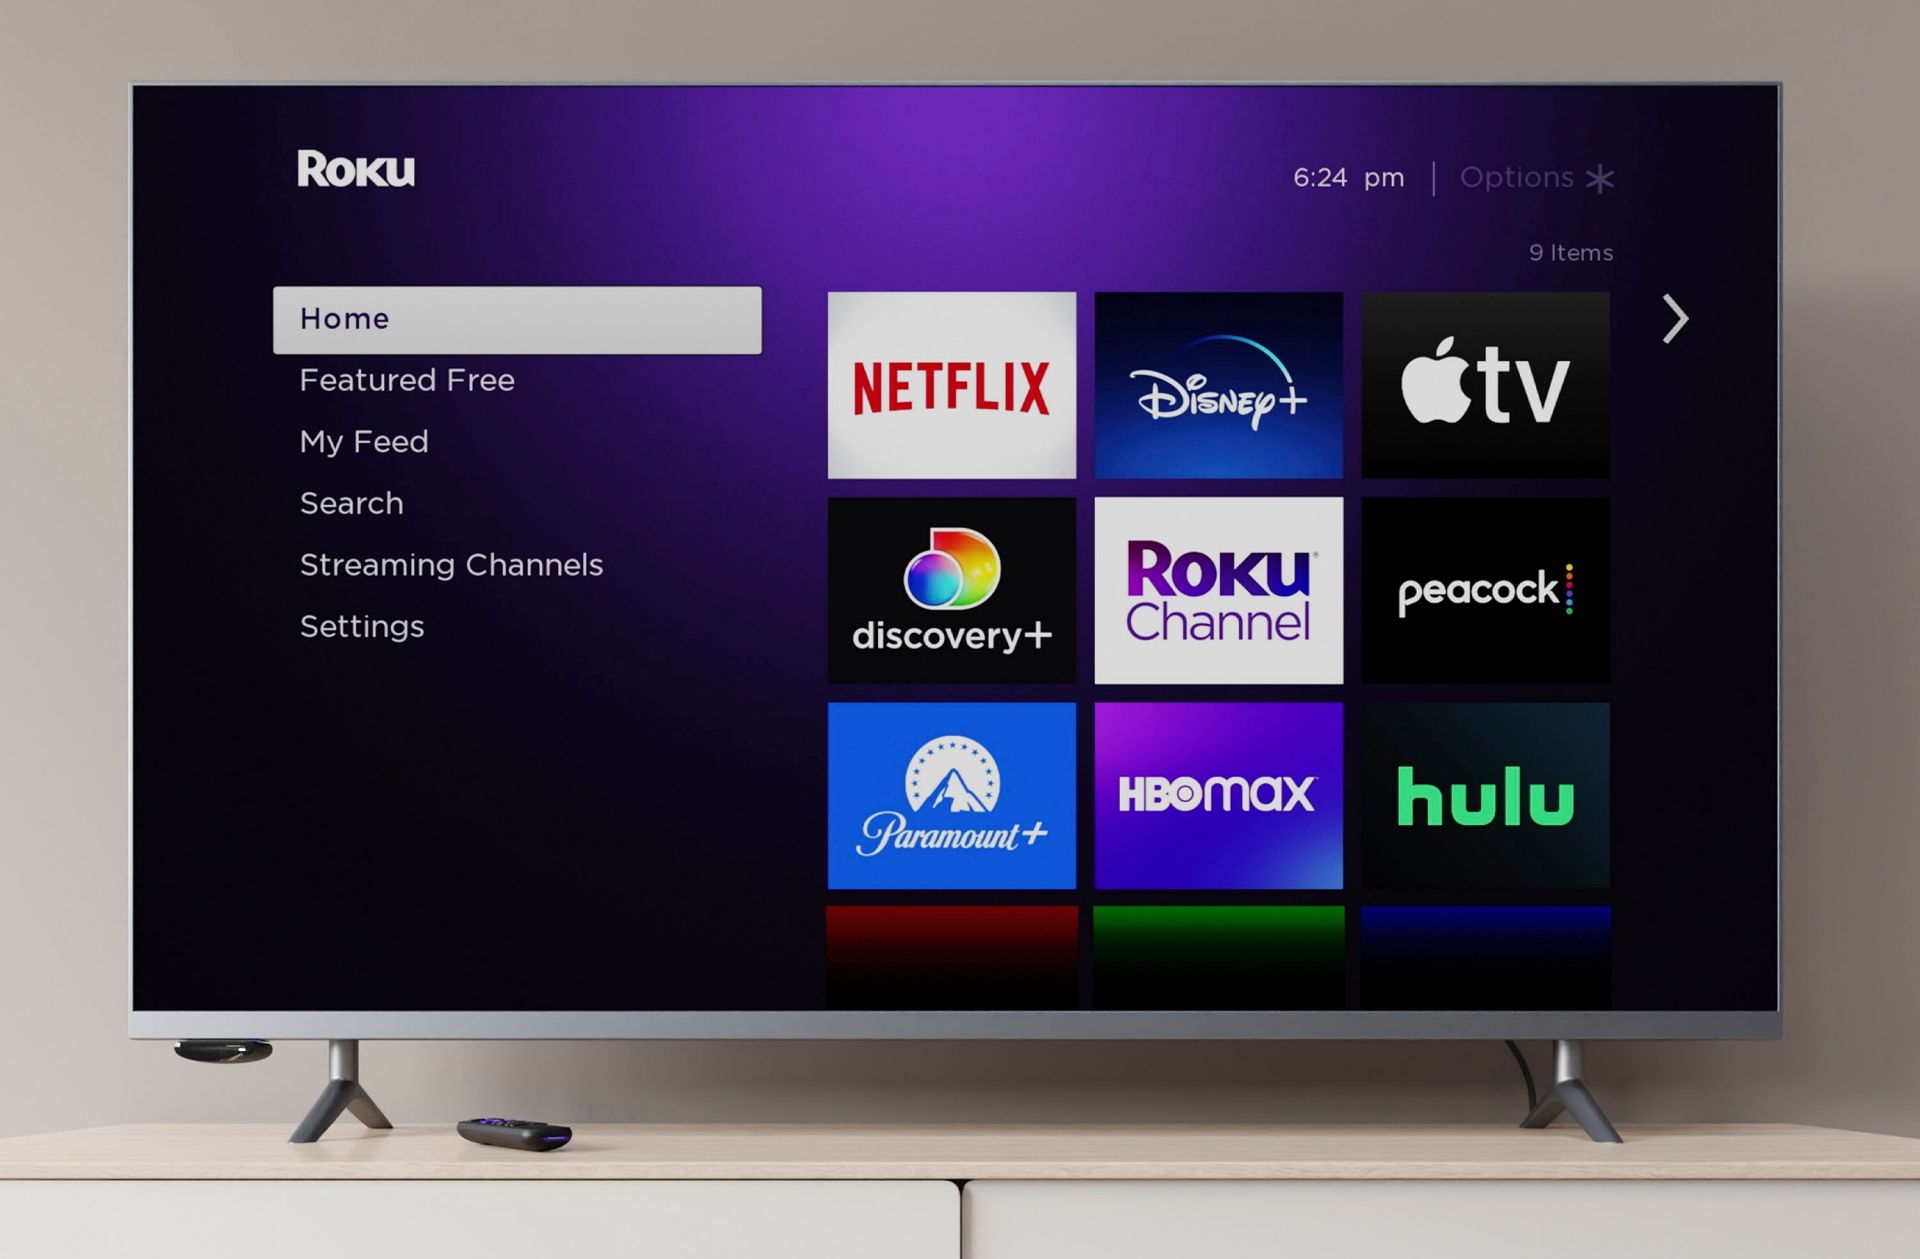 Image showing a TV with Roku OS opened on it